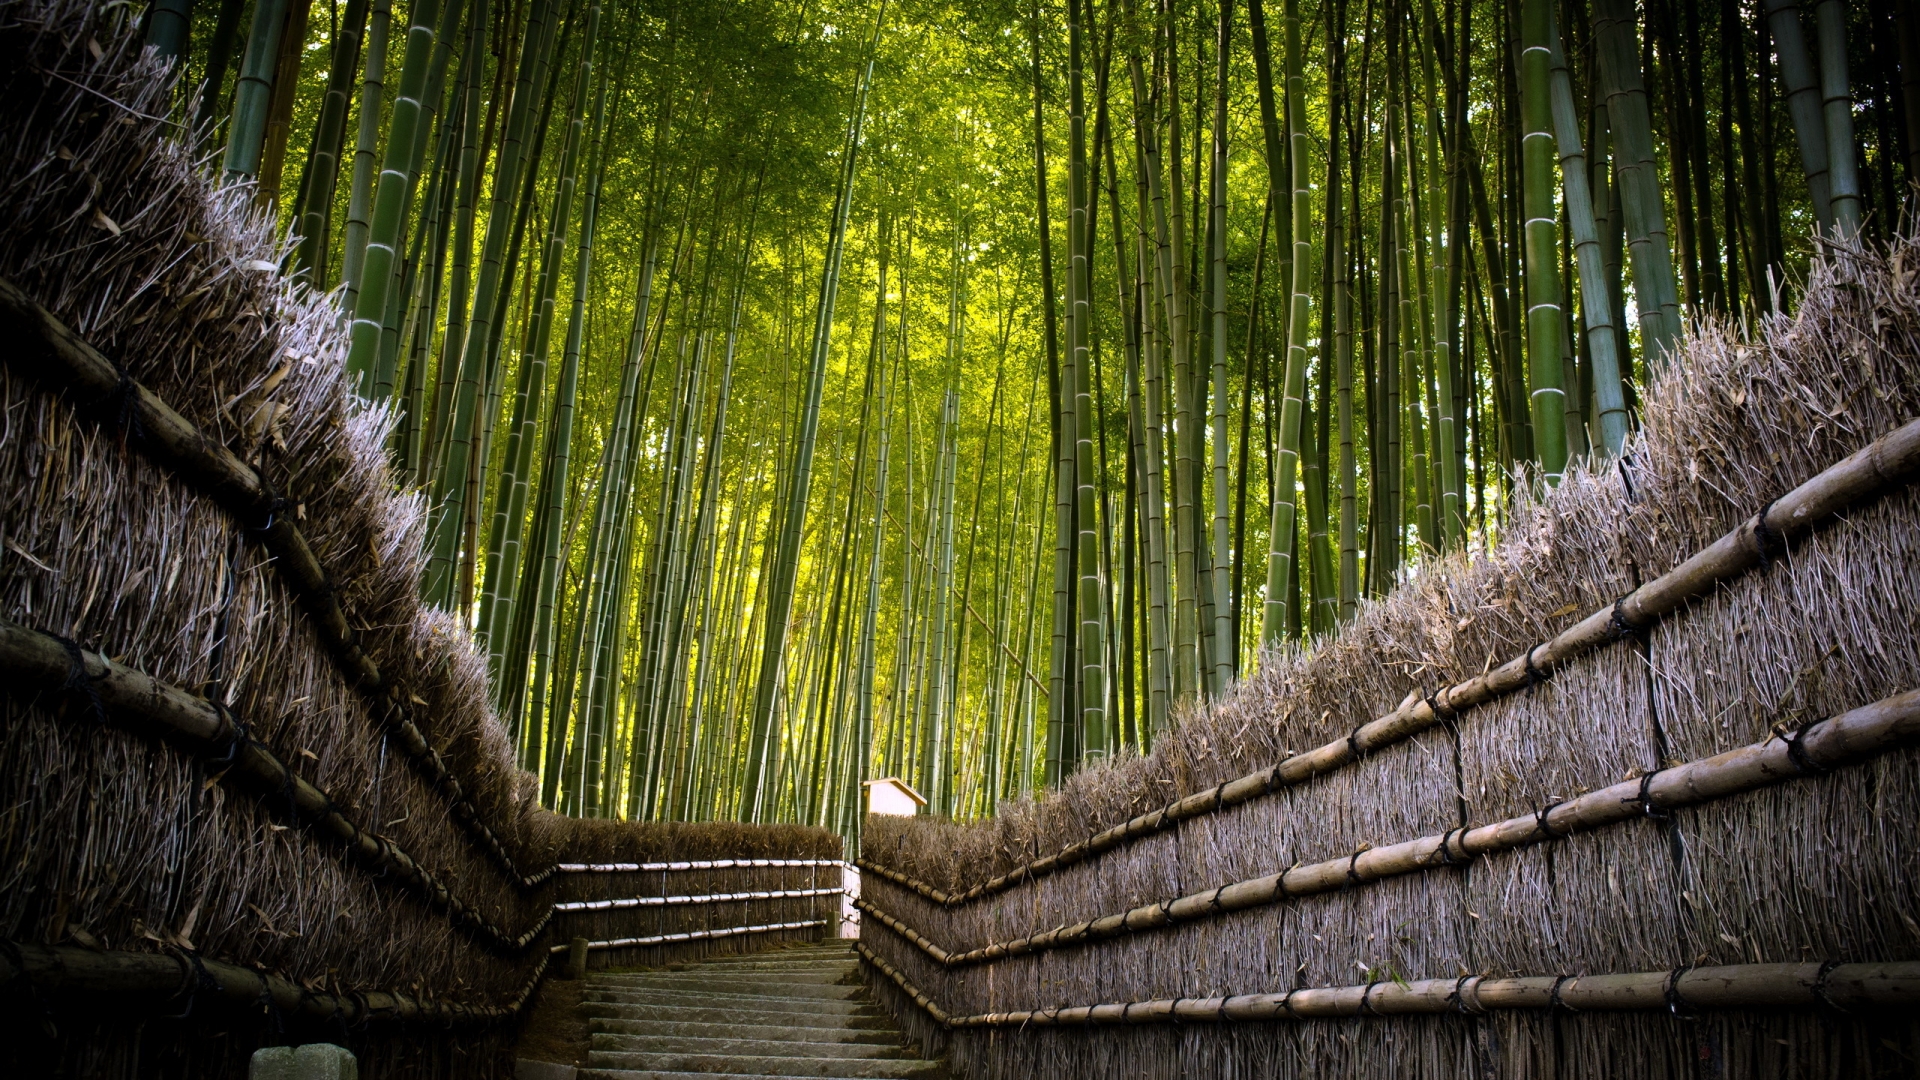 Bamboo Fence for 1920 x 1080 HDTV 1080p resolution